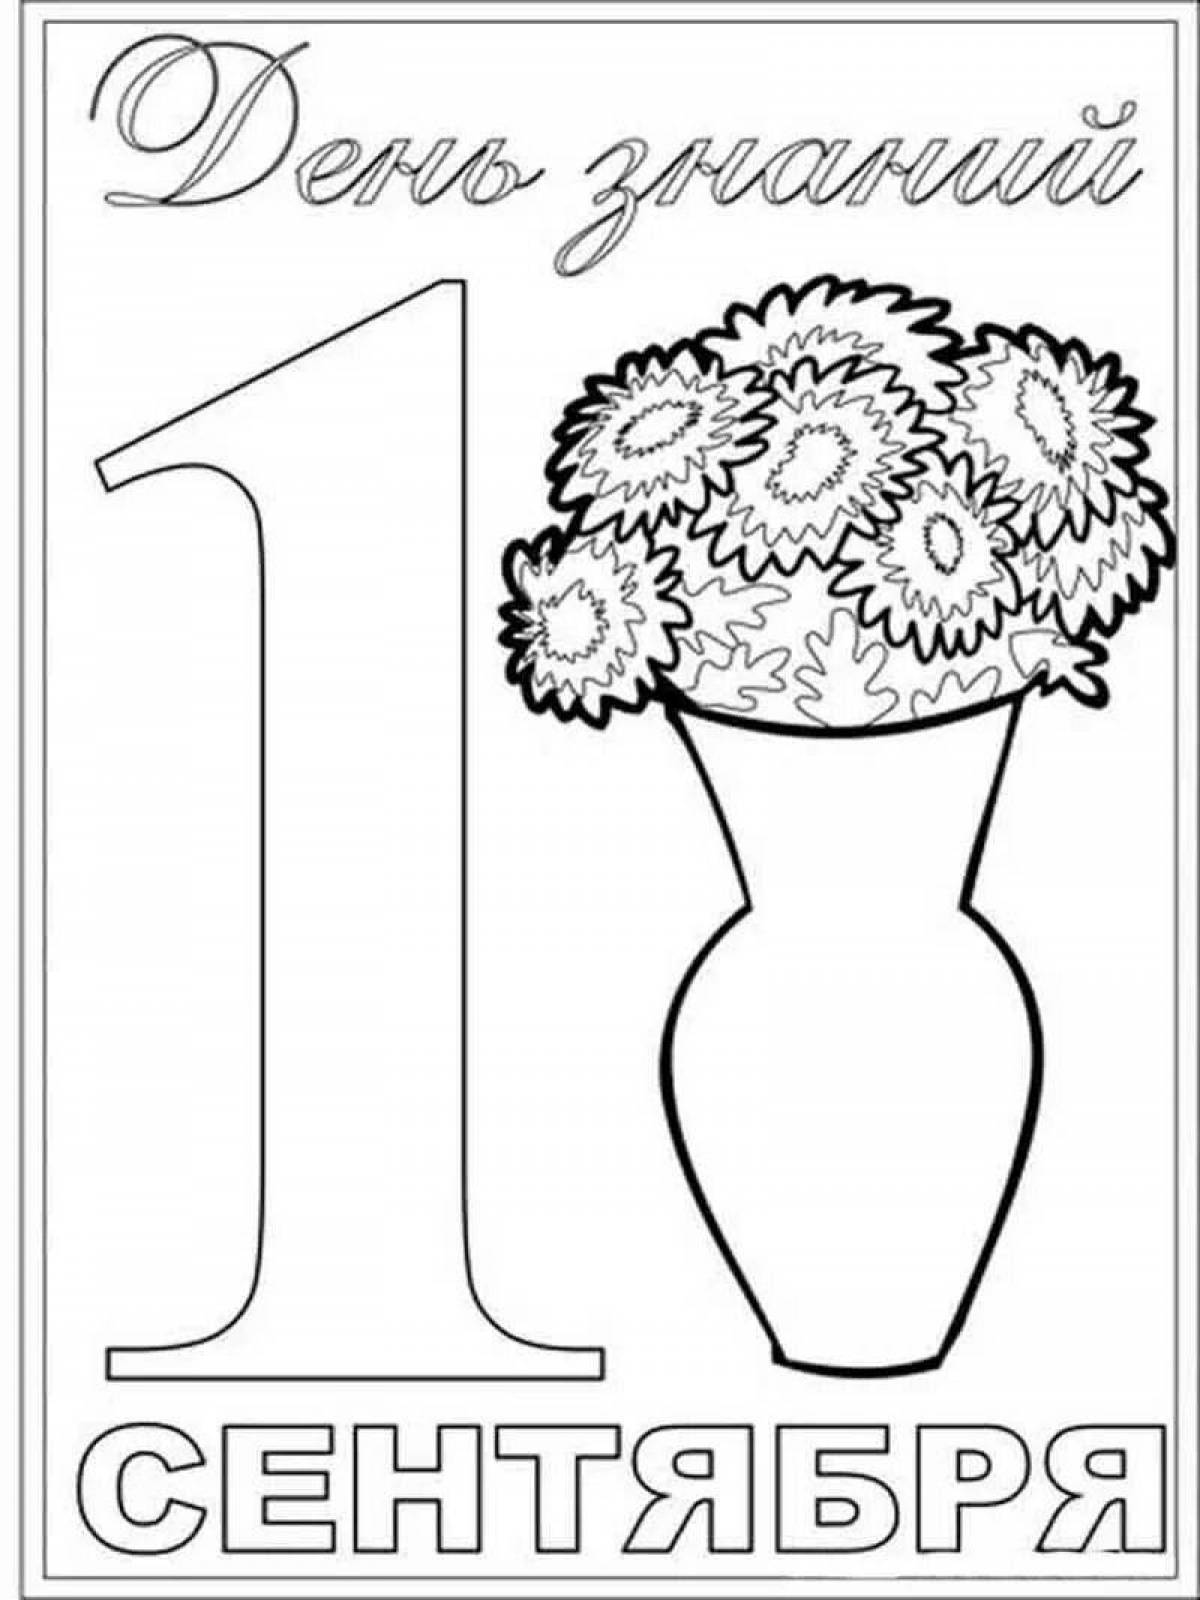 A fun September coloring book for kids